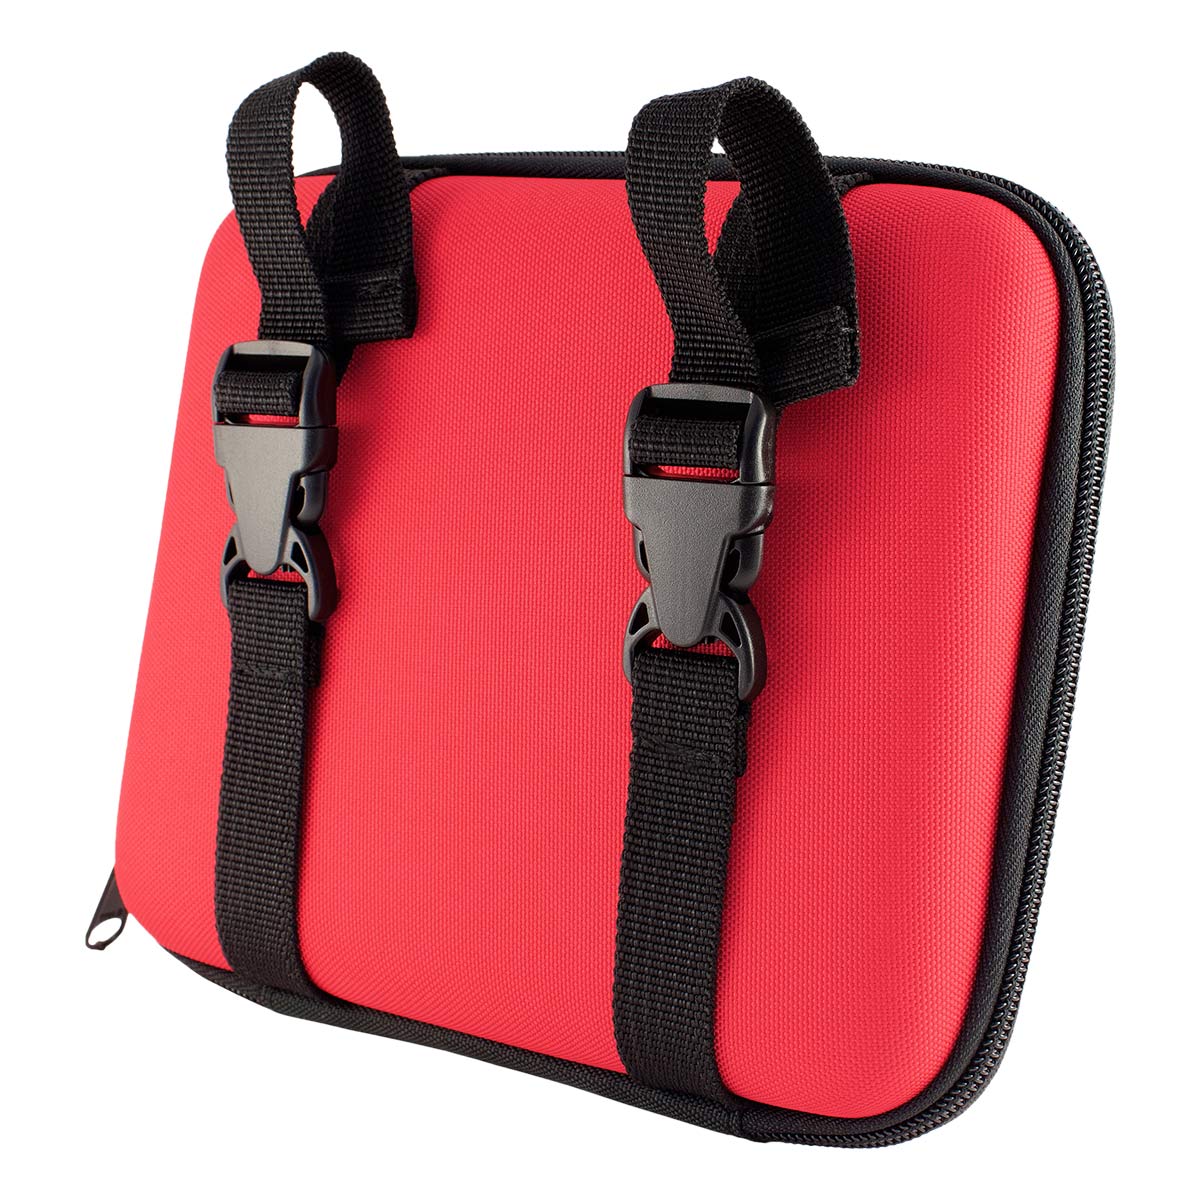 Tramedic® Individual Response Pack back view showing straps and buckles